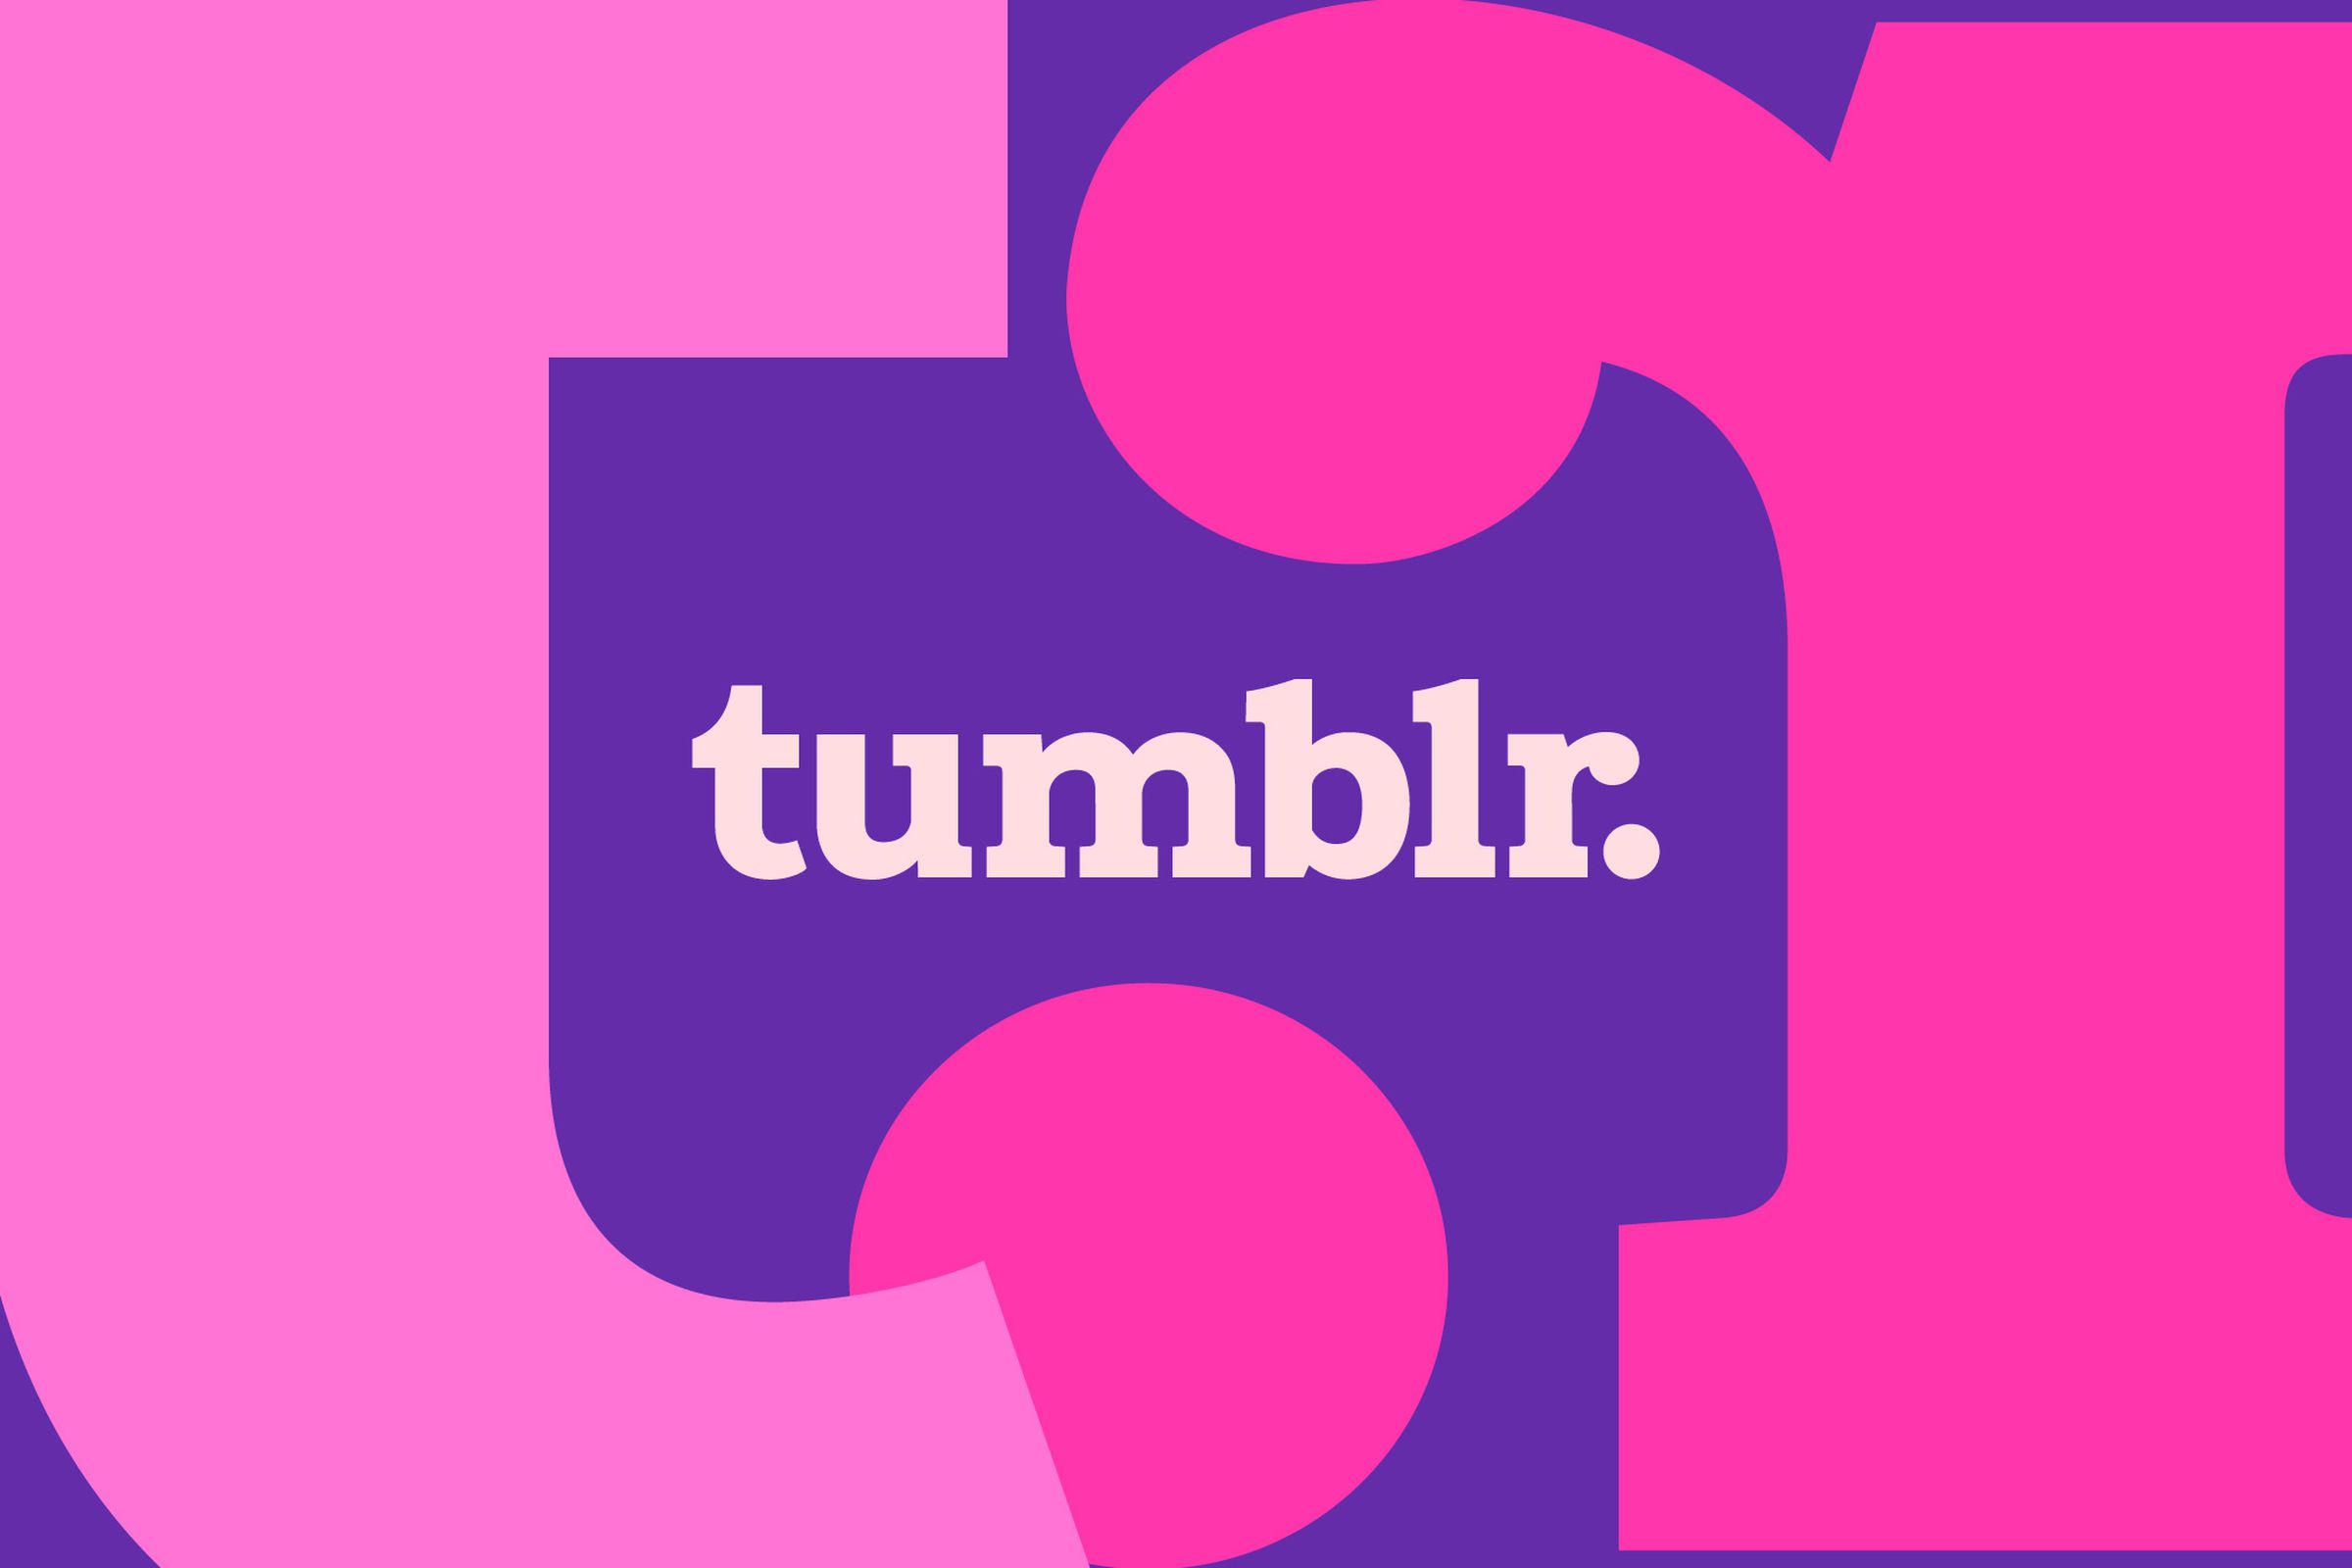 The Tumblr logo on a pink and purple background